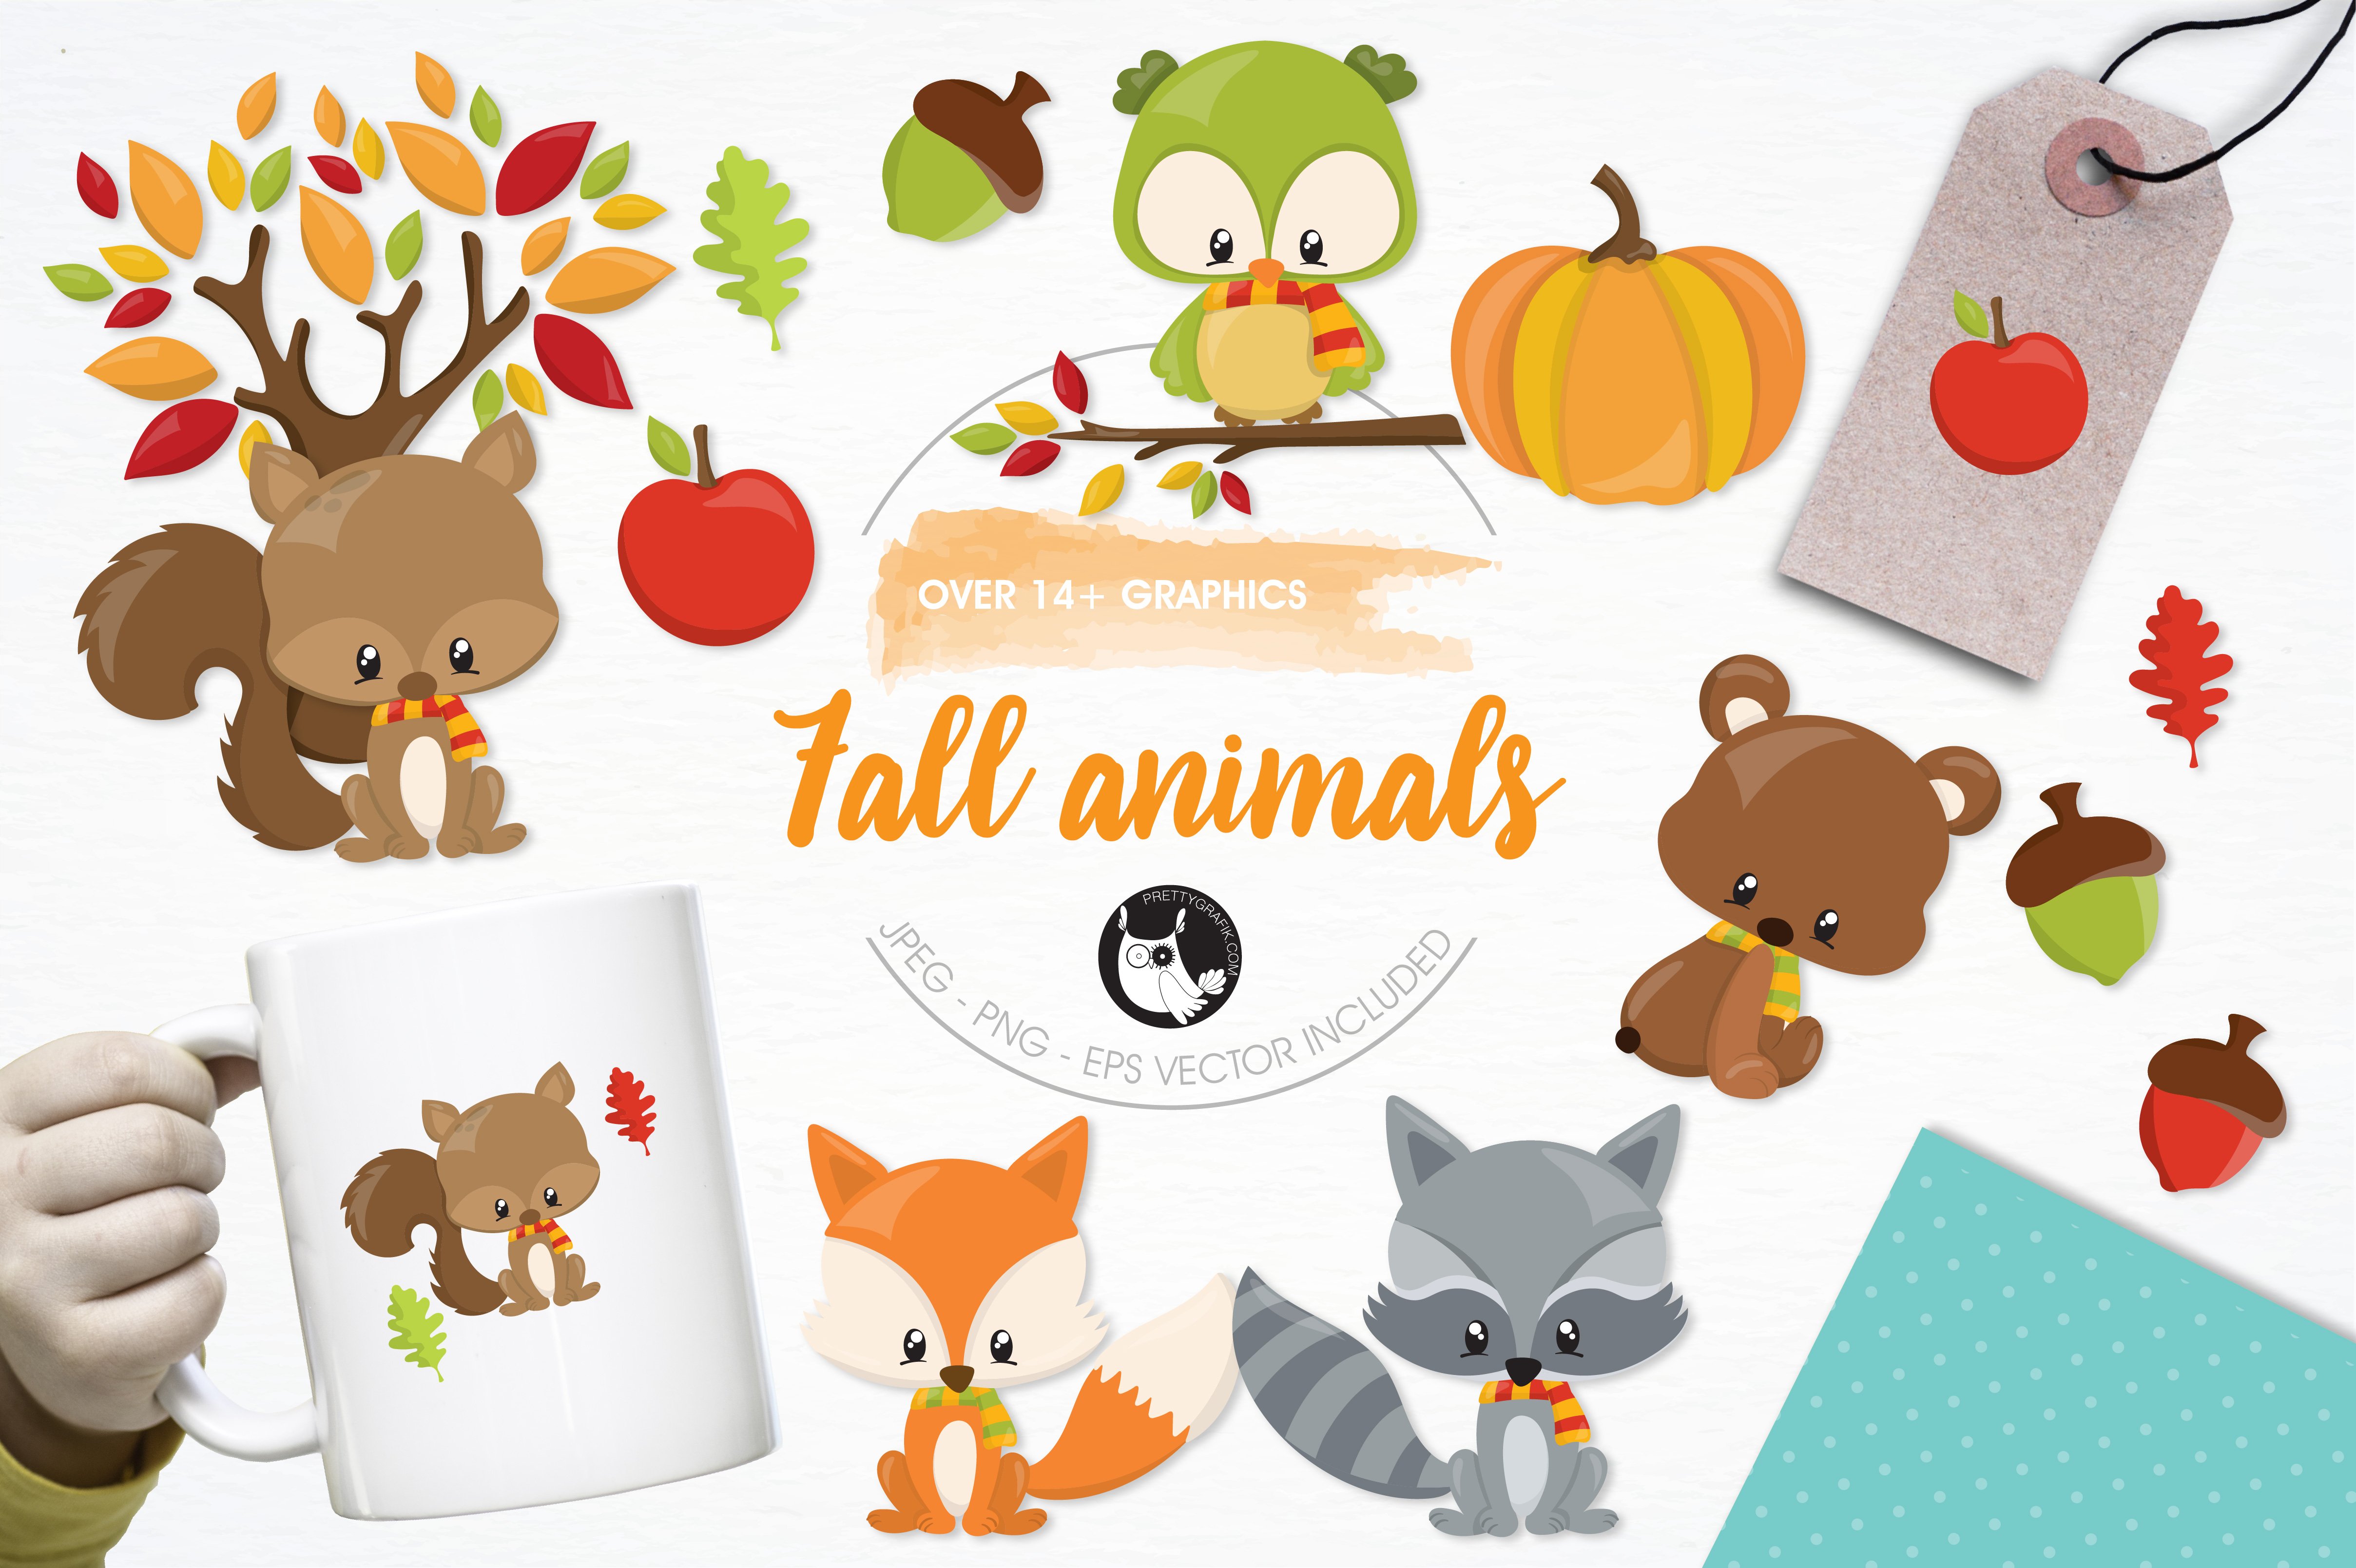 Fall animals illustration pack - Vector Image